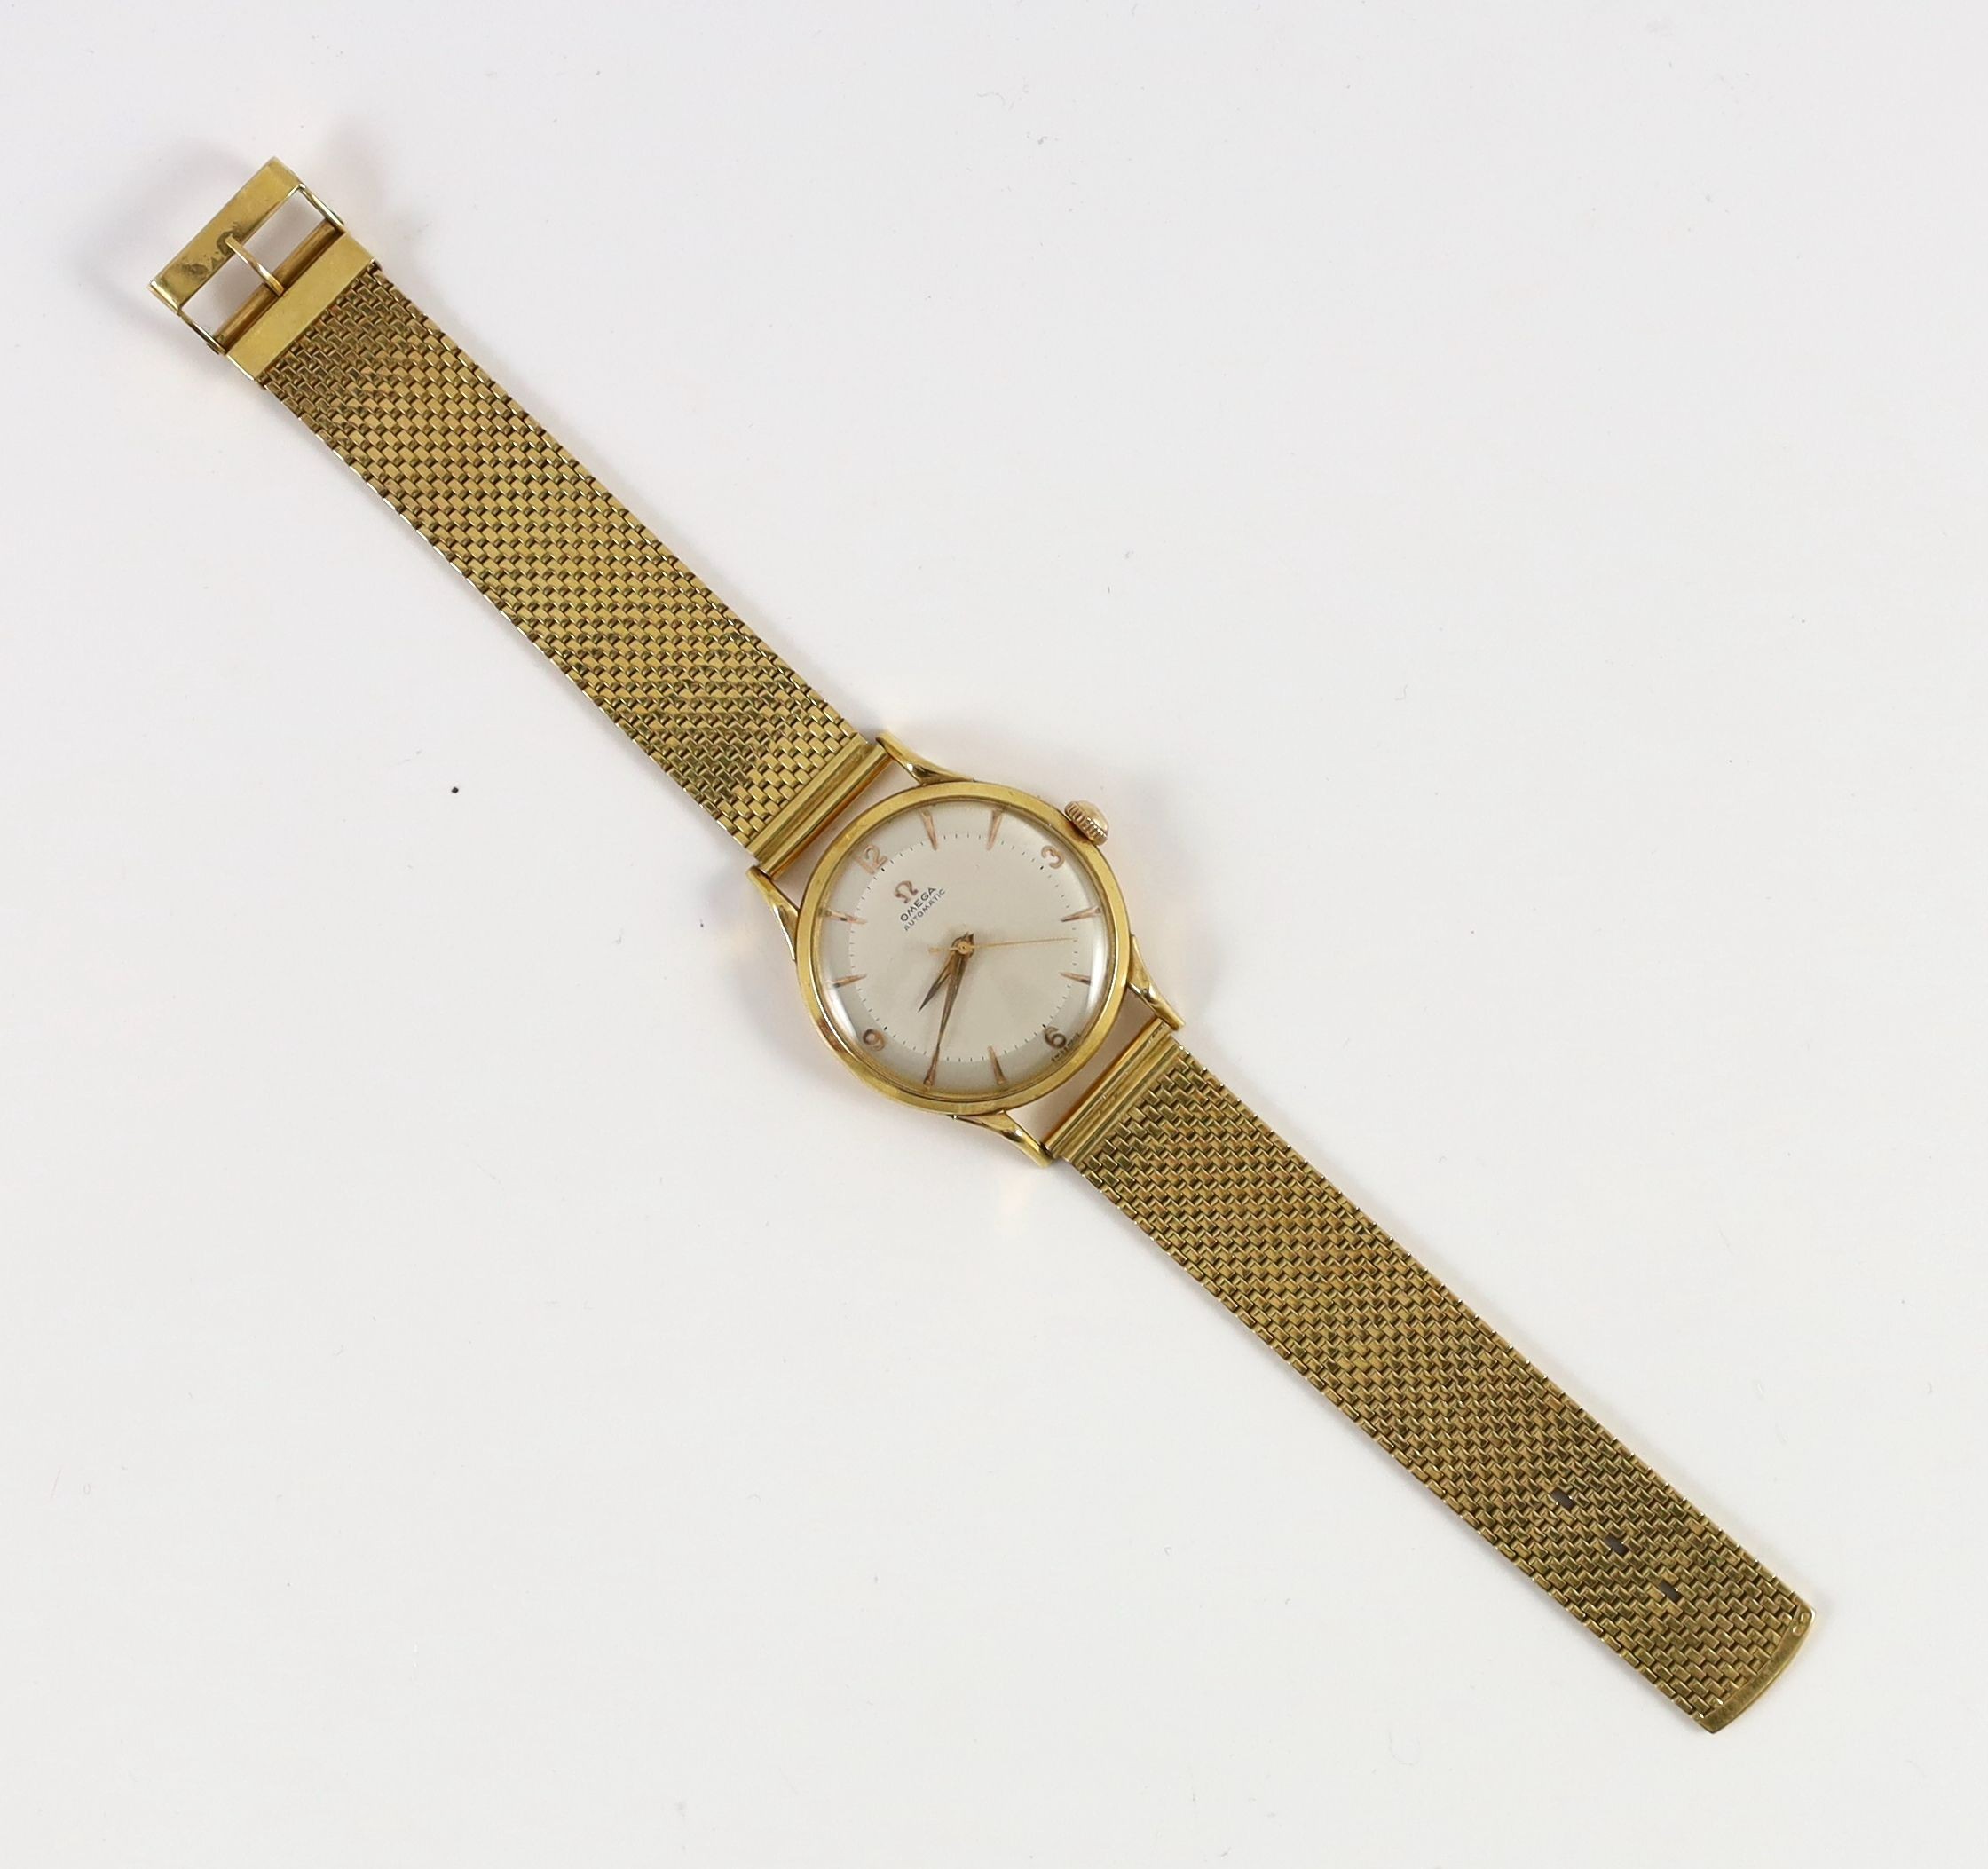 A gentleman's 1950's 18ct gold Omega Automatic wrist watch